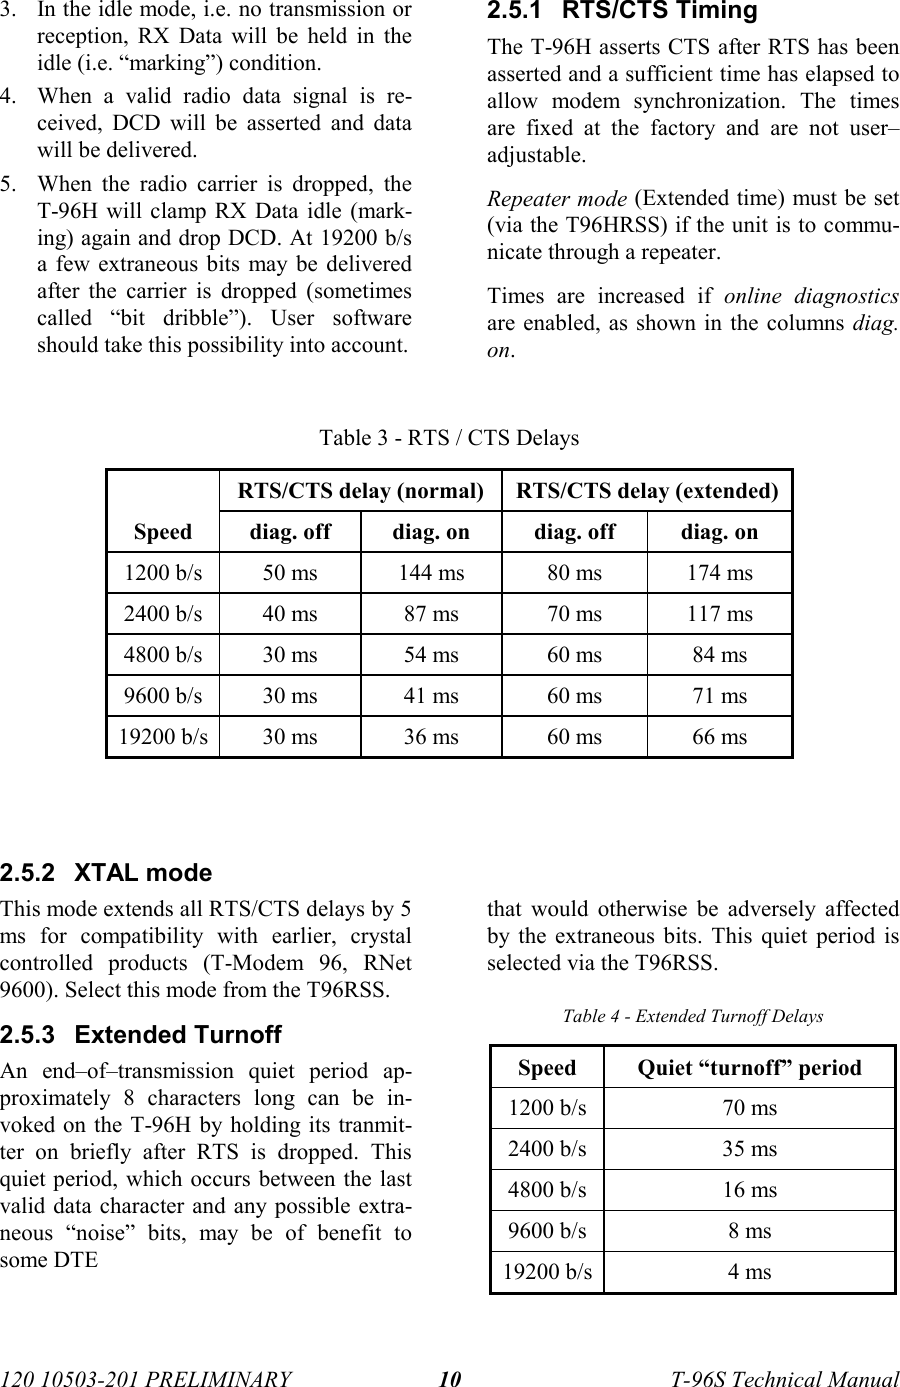 120 10503-201 PRELIMINARY T-96S Technical Manual103. In the idle mode, i.e. no transmission orreception, RX Data will be held in theidle (i.e. “marking”) condition.4. When a valid radio data signal is re-ceived, DCD will be asserted and datawill be delivered.5. When the radio carrier is dropped, theT-96H will clamp RX Data idle (mark-ing) again and drop DCD. At 19200 b/sa few extraneous bits may be deliveredafter the carrier is dropped (sometimescalled “bit dribble”). User softwareshould take this possibility into account.2.5.1 RTS/CTS TimingThe T-96H asserts CTS after RTS has beenasserted and a sufficient time has elapsed toallow modem synchronization. The timesare fixed at the factory and are not user–adjustable.Repeater mode (Extended time) must be set(via the T96HRSS) if the unit is to commu-nicate through a repeater.Times are increased if online diagnosticsare enabled, as shown in the columns diag.on.Table 3 - RTS / CTS DelaysRTS/CTS delay (normal) RTS/CTS delay (extended)Speed diag. off diag. on diag. off diag. on1200 b/s 50 ms 144 ms 80 ms 174 ms2400 b/s 40 ms 87 ms 70 ms 117 ms4800 b/s 30 ms 54 ms 60 ms 84 ms9600 b/s 30 ms 41 ms 60 ms 71 ms19200 b/s 30 ms 36 ms 60 ms 66 ms2.5.2 XTAL modeThis mode extends all RTS/CTS delays by 5ms for compatibility with earlier, crystalcontrolled products (T-Modem 96, RNet9600). Select this mode from the T96RSS.2.5.3 Extended TurnoffAn end–of–transmission quiet period ap-proximately 8 characters long can be in-voked on the T-96H by holding its tranmit-ter on briefly after RTS is dropped. Thisquiet period, which occurs between the lastvalid data character and any possible extra-neous “noise” bits, may be of benefit tosome DTEthat would otherwise be adversely affectedby the extraneous bits. This quiet period isselected via the T96RSS.Table 4 - Extended Turnoff DelaysSpeed Quiet “turnoff” period1200 b/s 70 ms2400 b/s 35 ms4800 b/s 16 ms9600 b/s 8 ms19200 b/s 4 ms